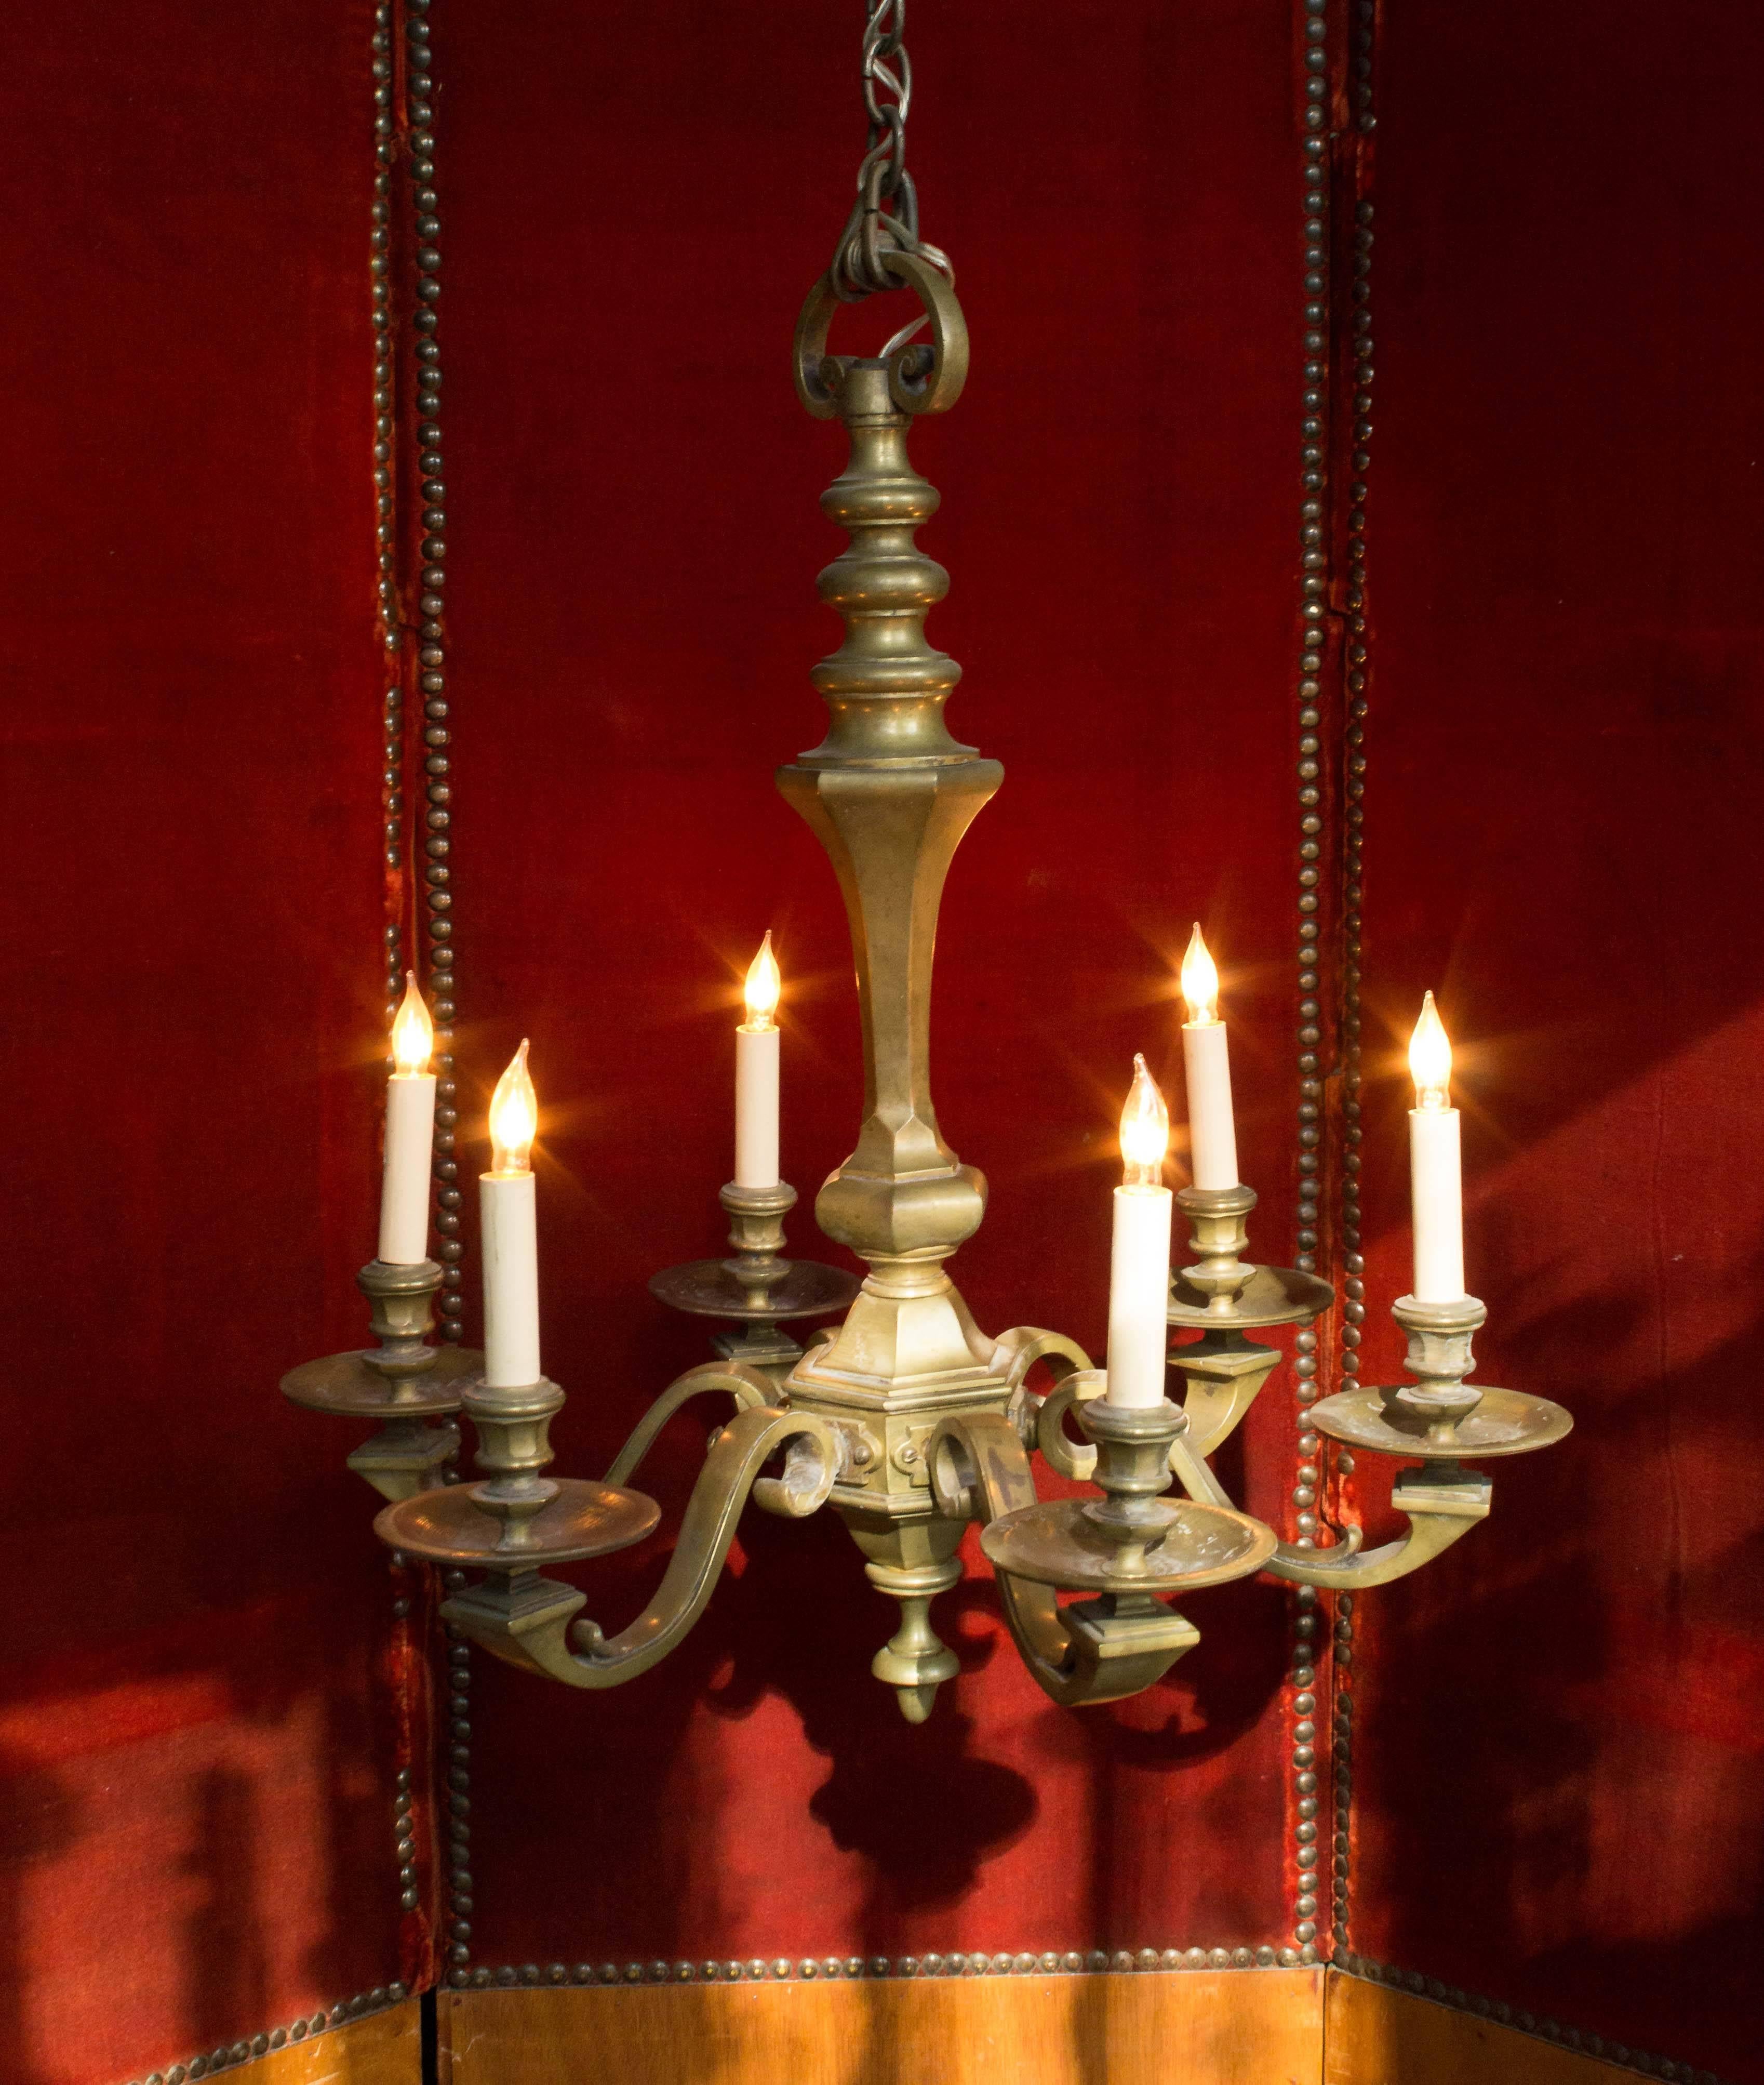 This remarkable French brass and bronze chandelier from the 1940s features six arms in a classic style. The quality of this piece is evident in its robust construction and intricate details. The chandelier has been hand polished to a rich, low